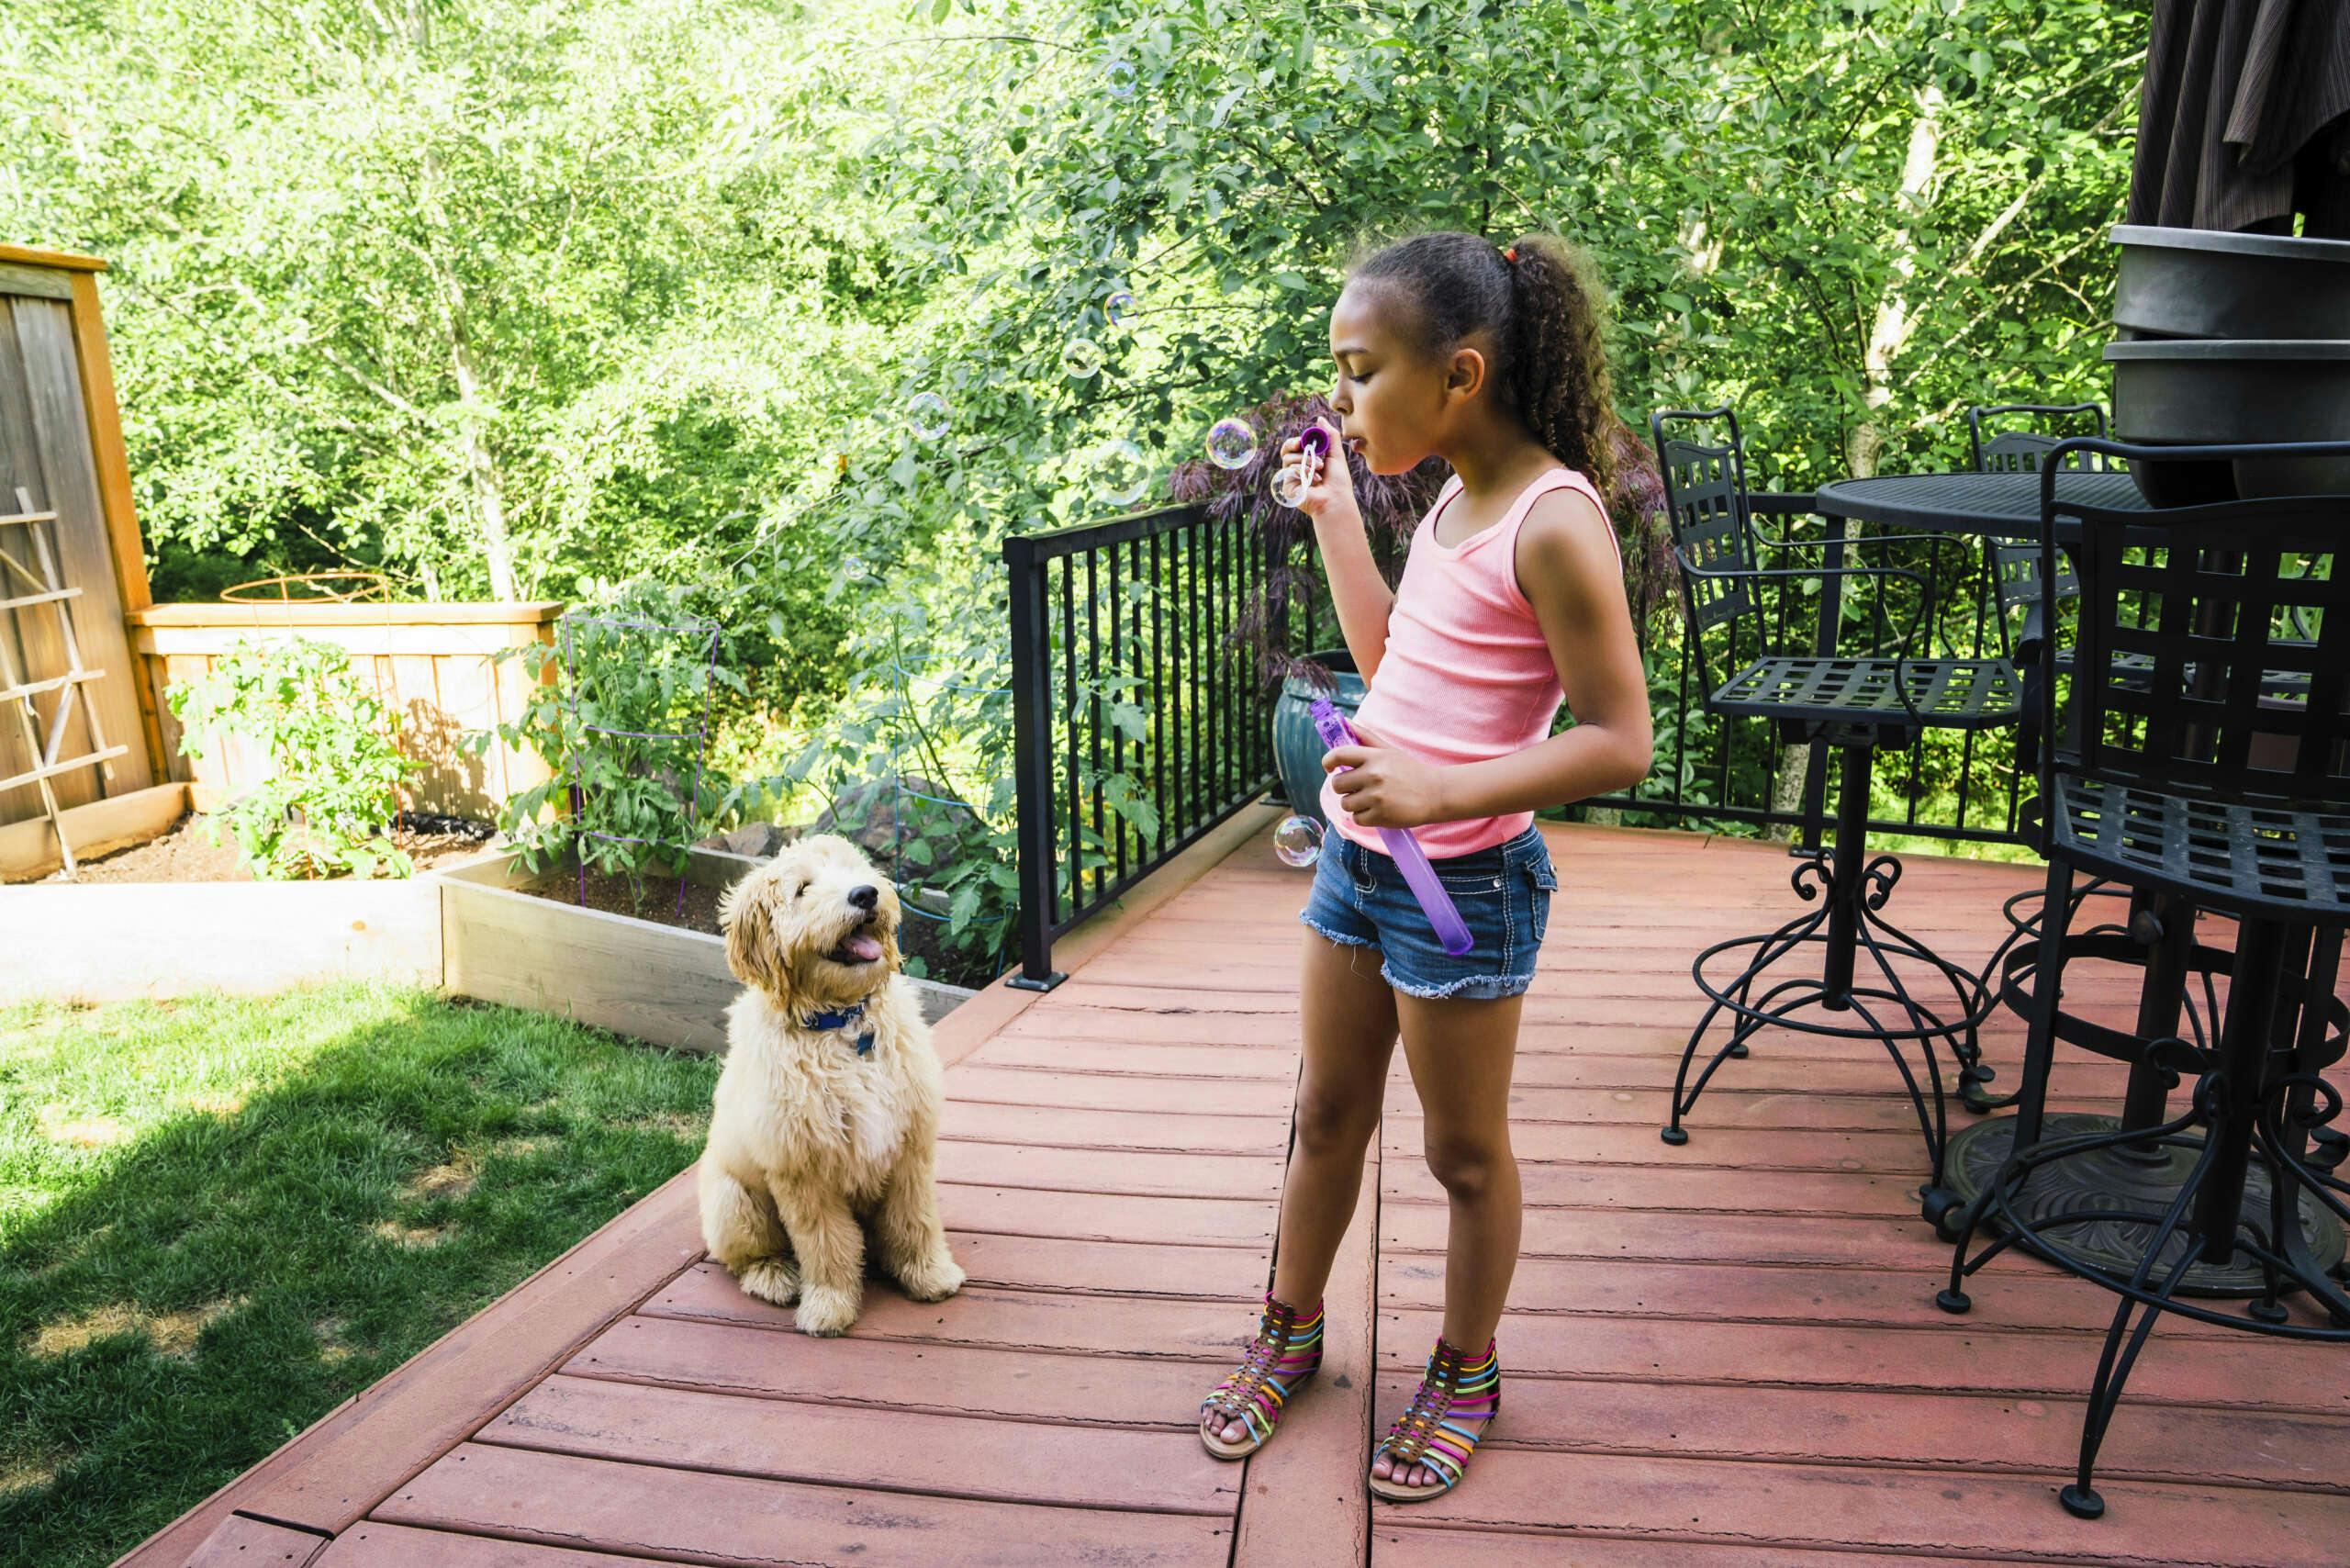 3 Easy and Effective Ways to Make a Dog-Friendly Backyard